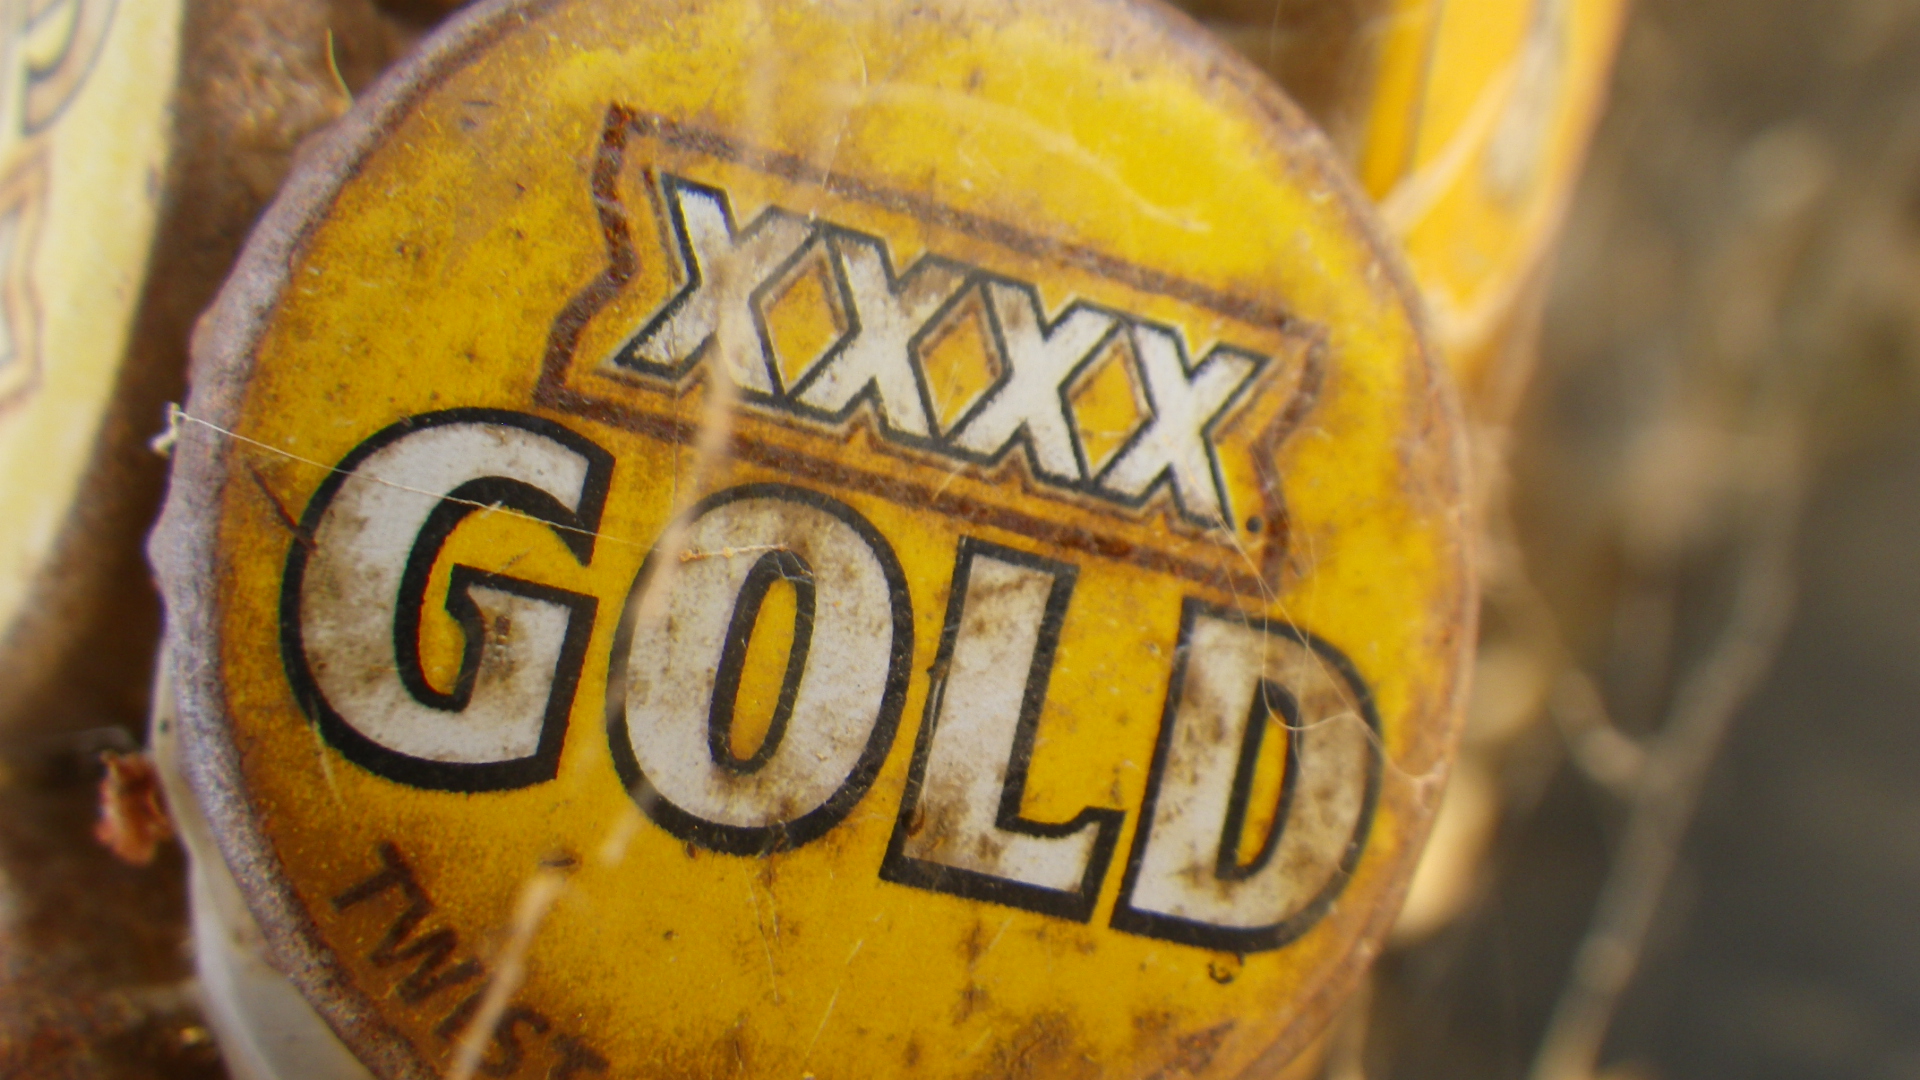 XXXX Gold Beer: A full detail about XXXX Gold Beer